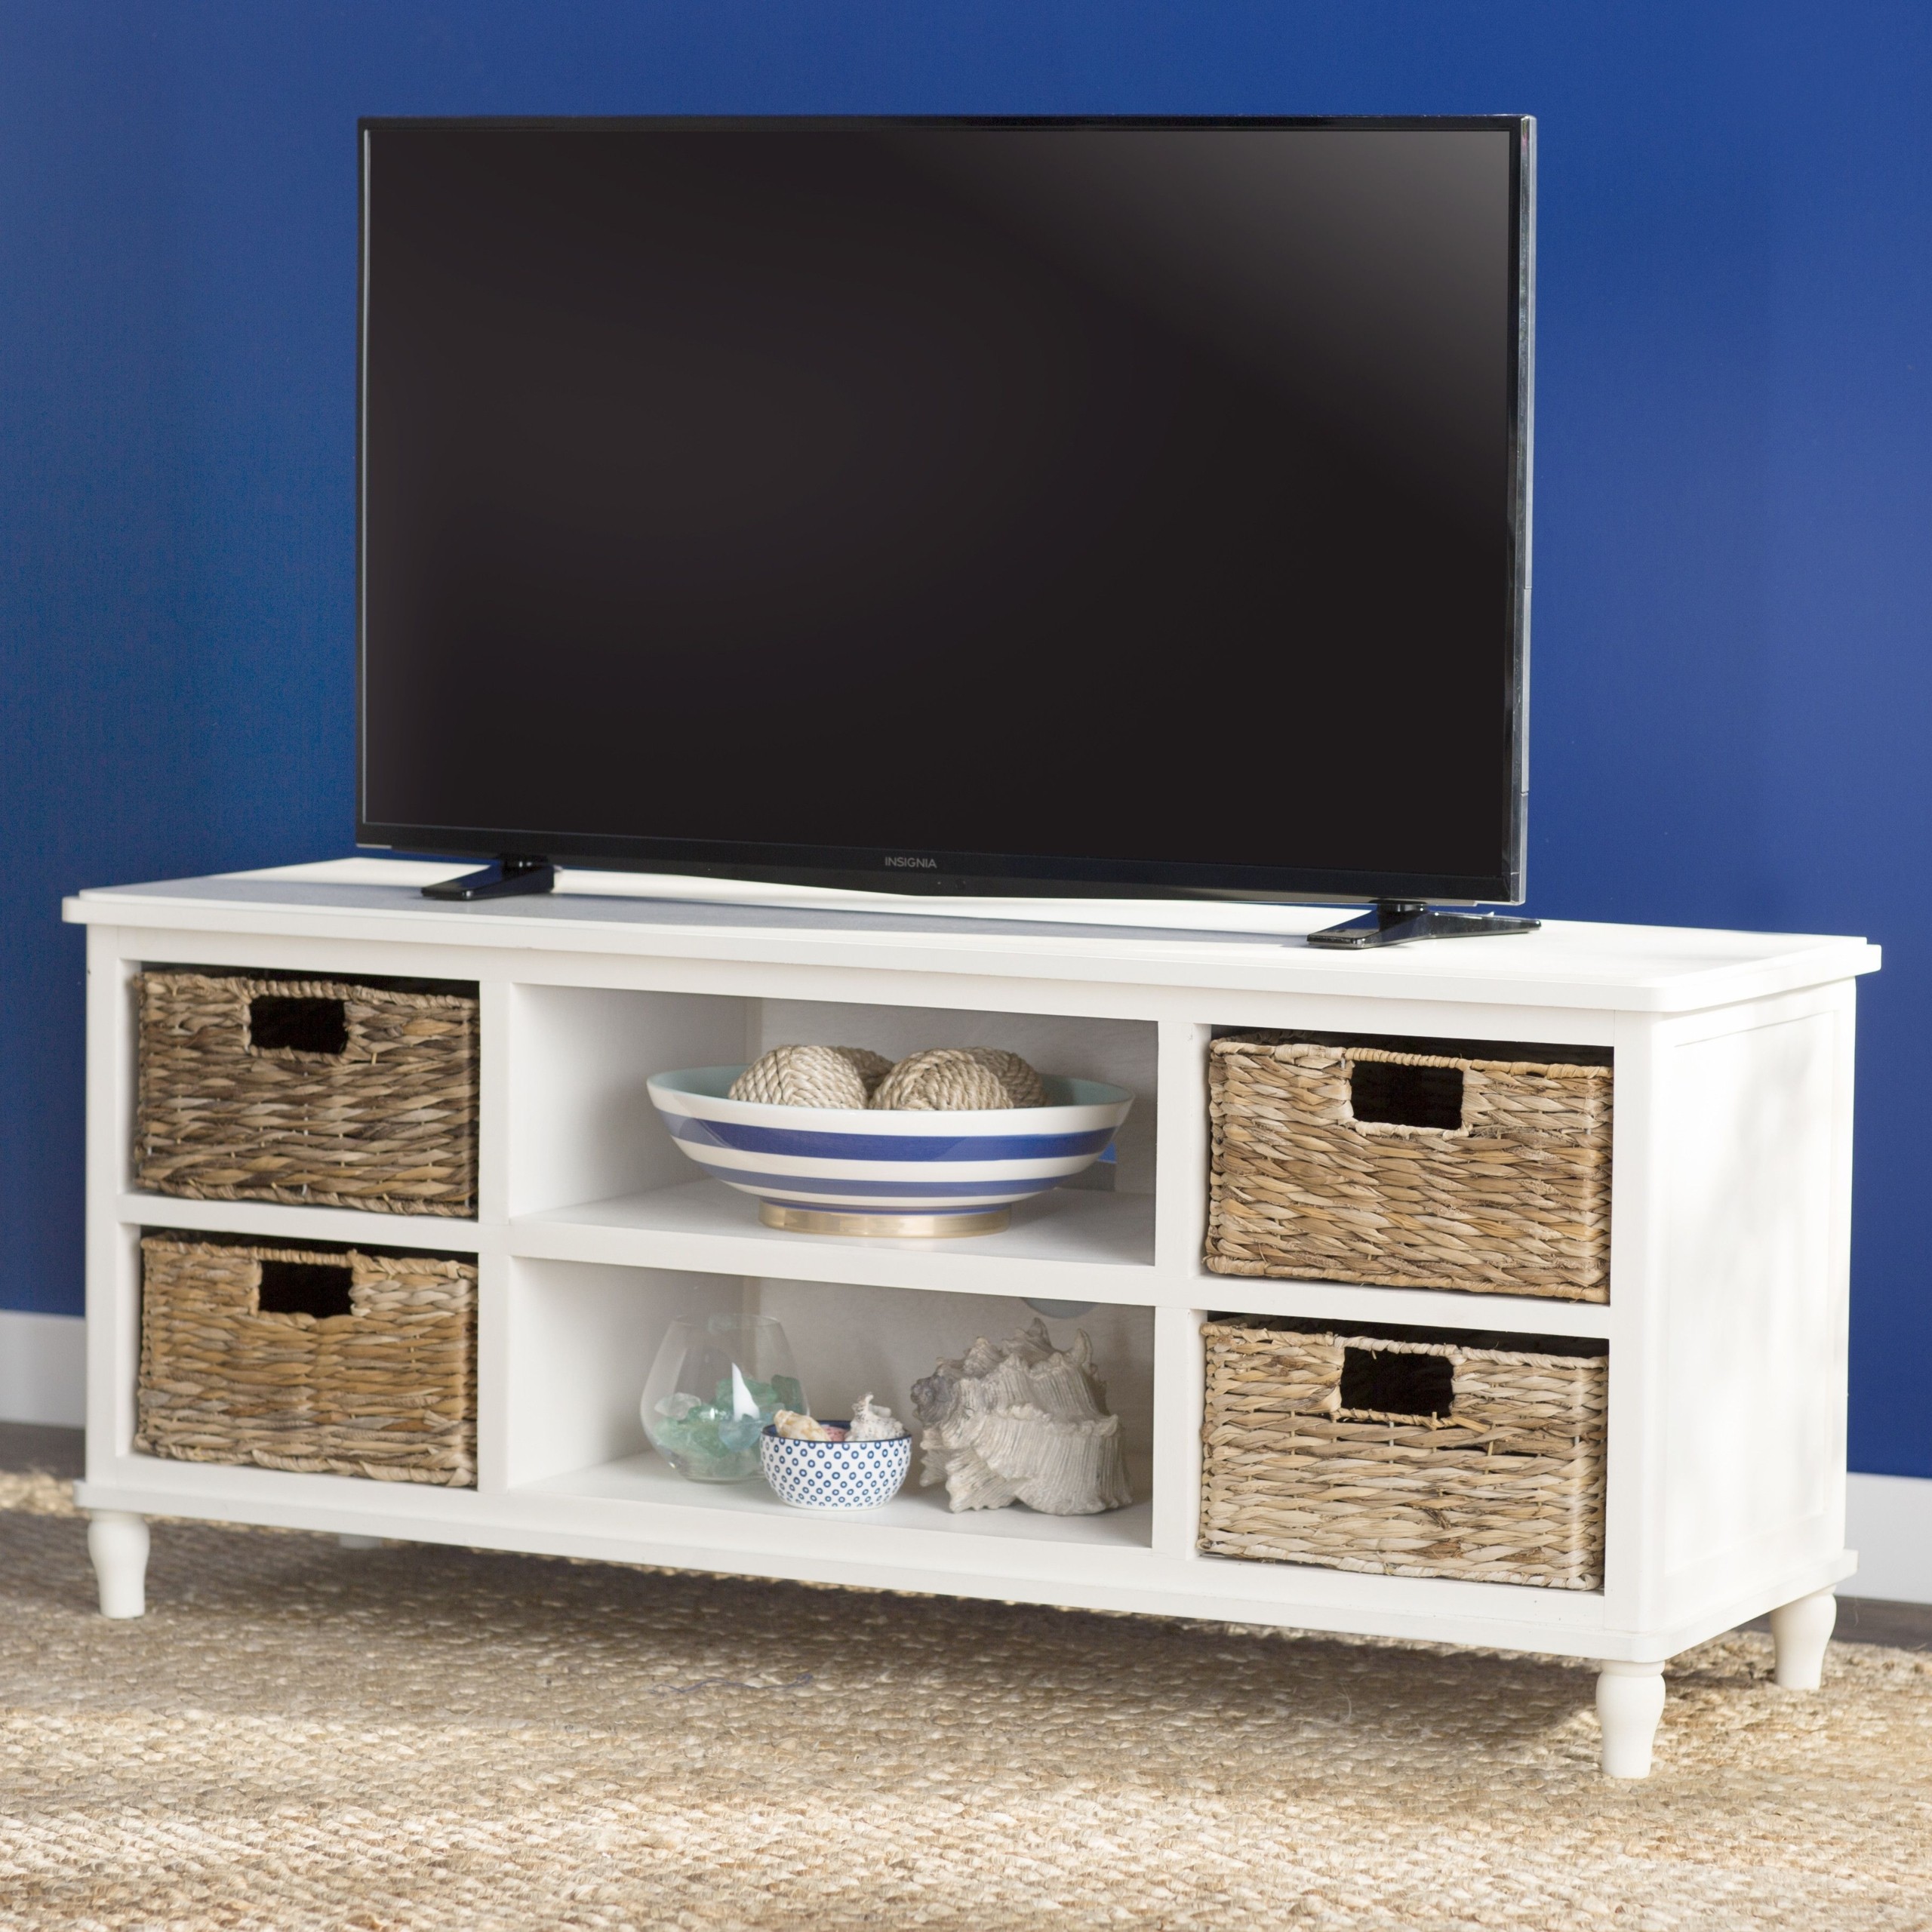 Santa Cruz Solid Wood TV Stand for TVs up to 55"